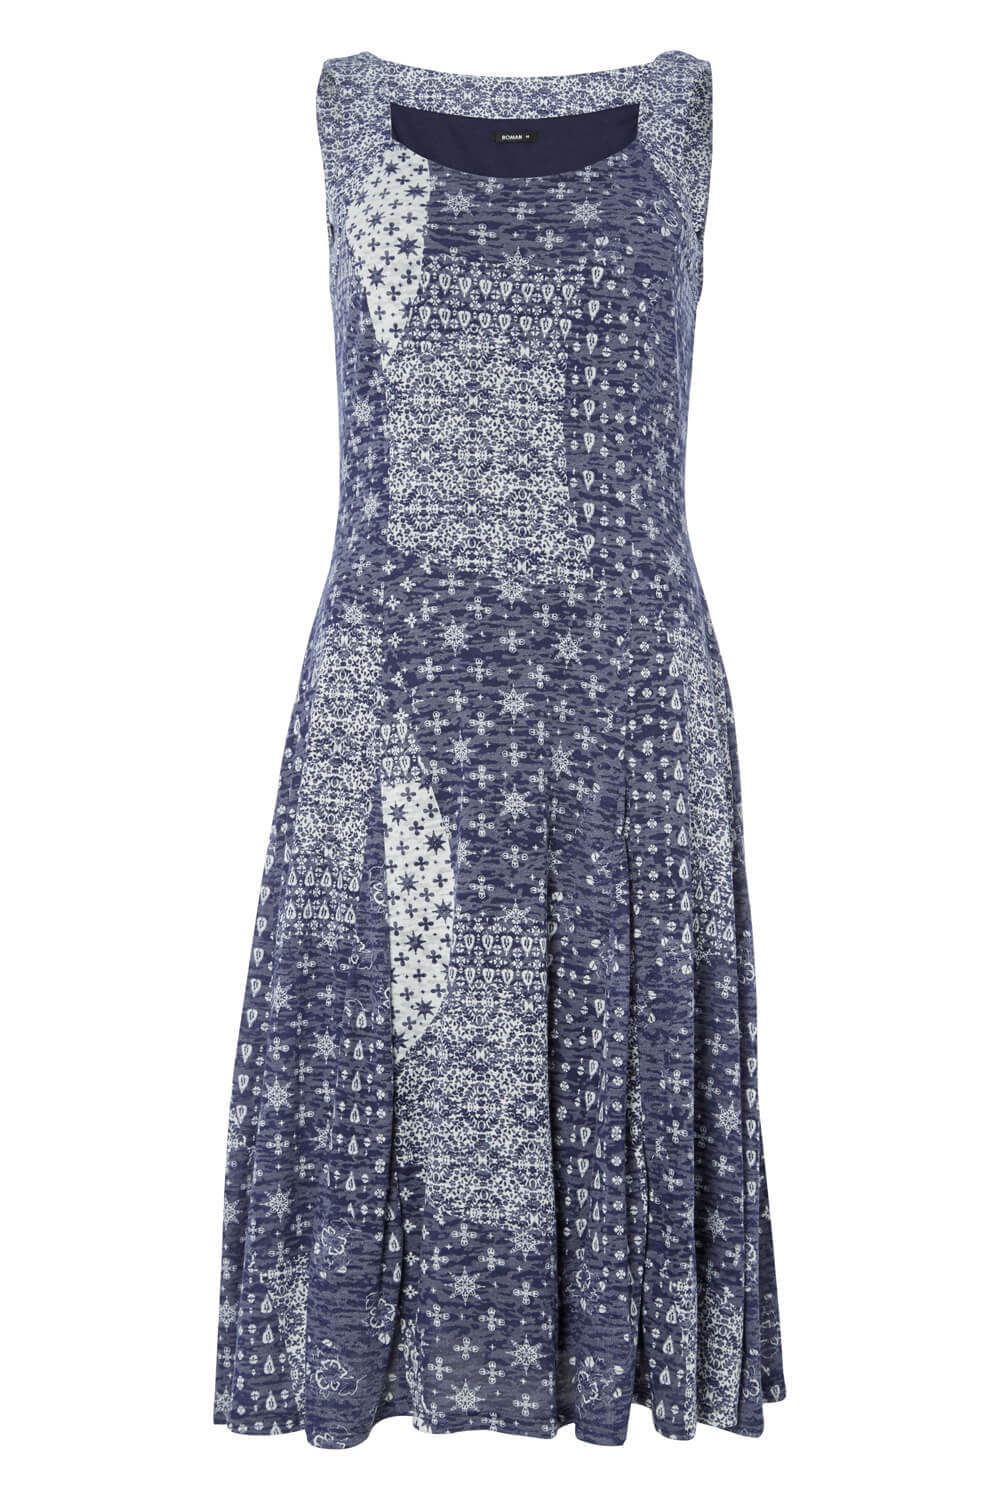 Blue Patchwork Print Fit and Flare Dress , Image 6 of 6